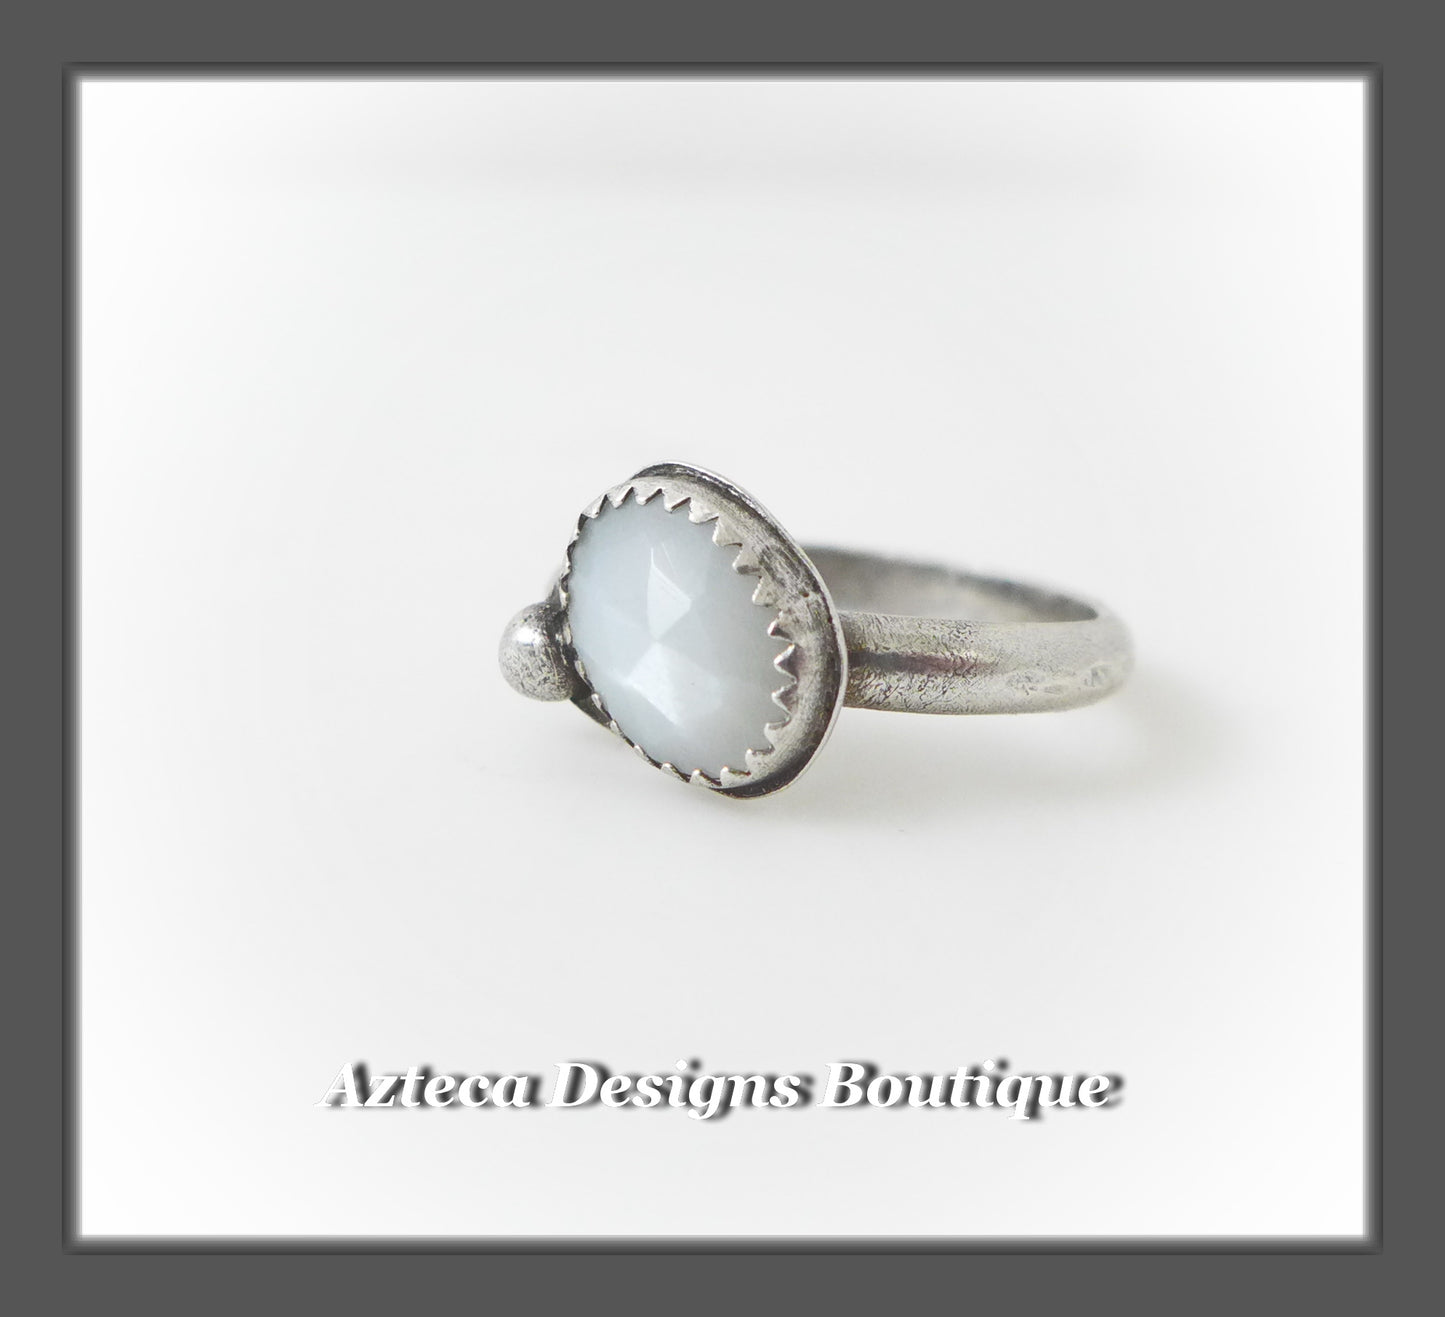 White Moonstone+Sterling Silver Ring Size 9